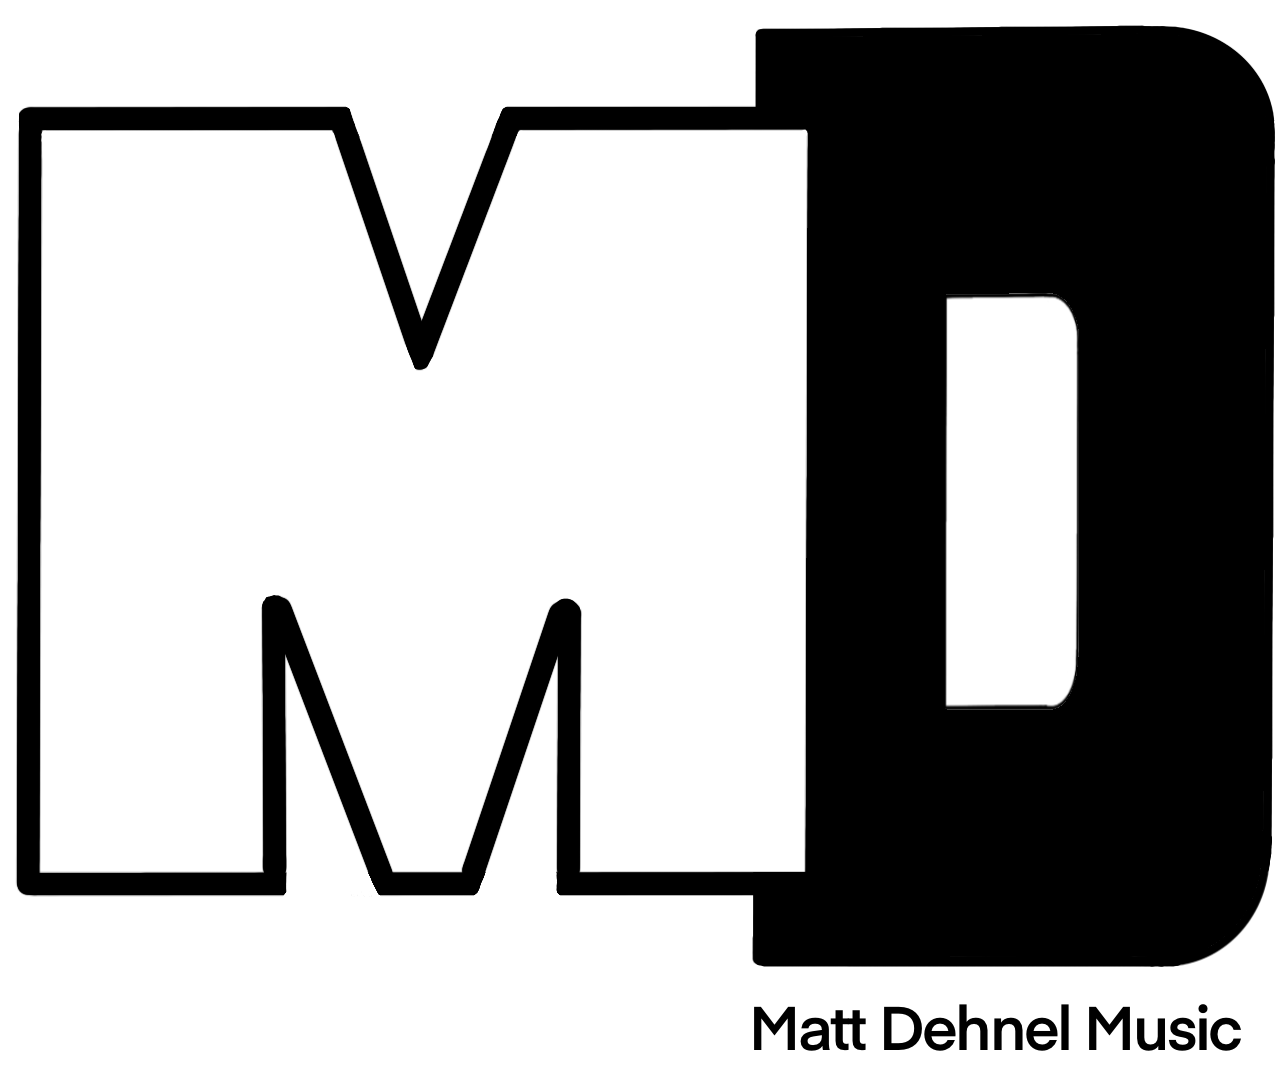 Matt Dehnel Music icon in black and white, centered on the homepage